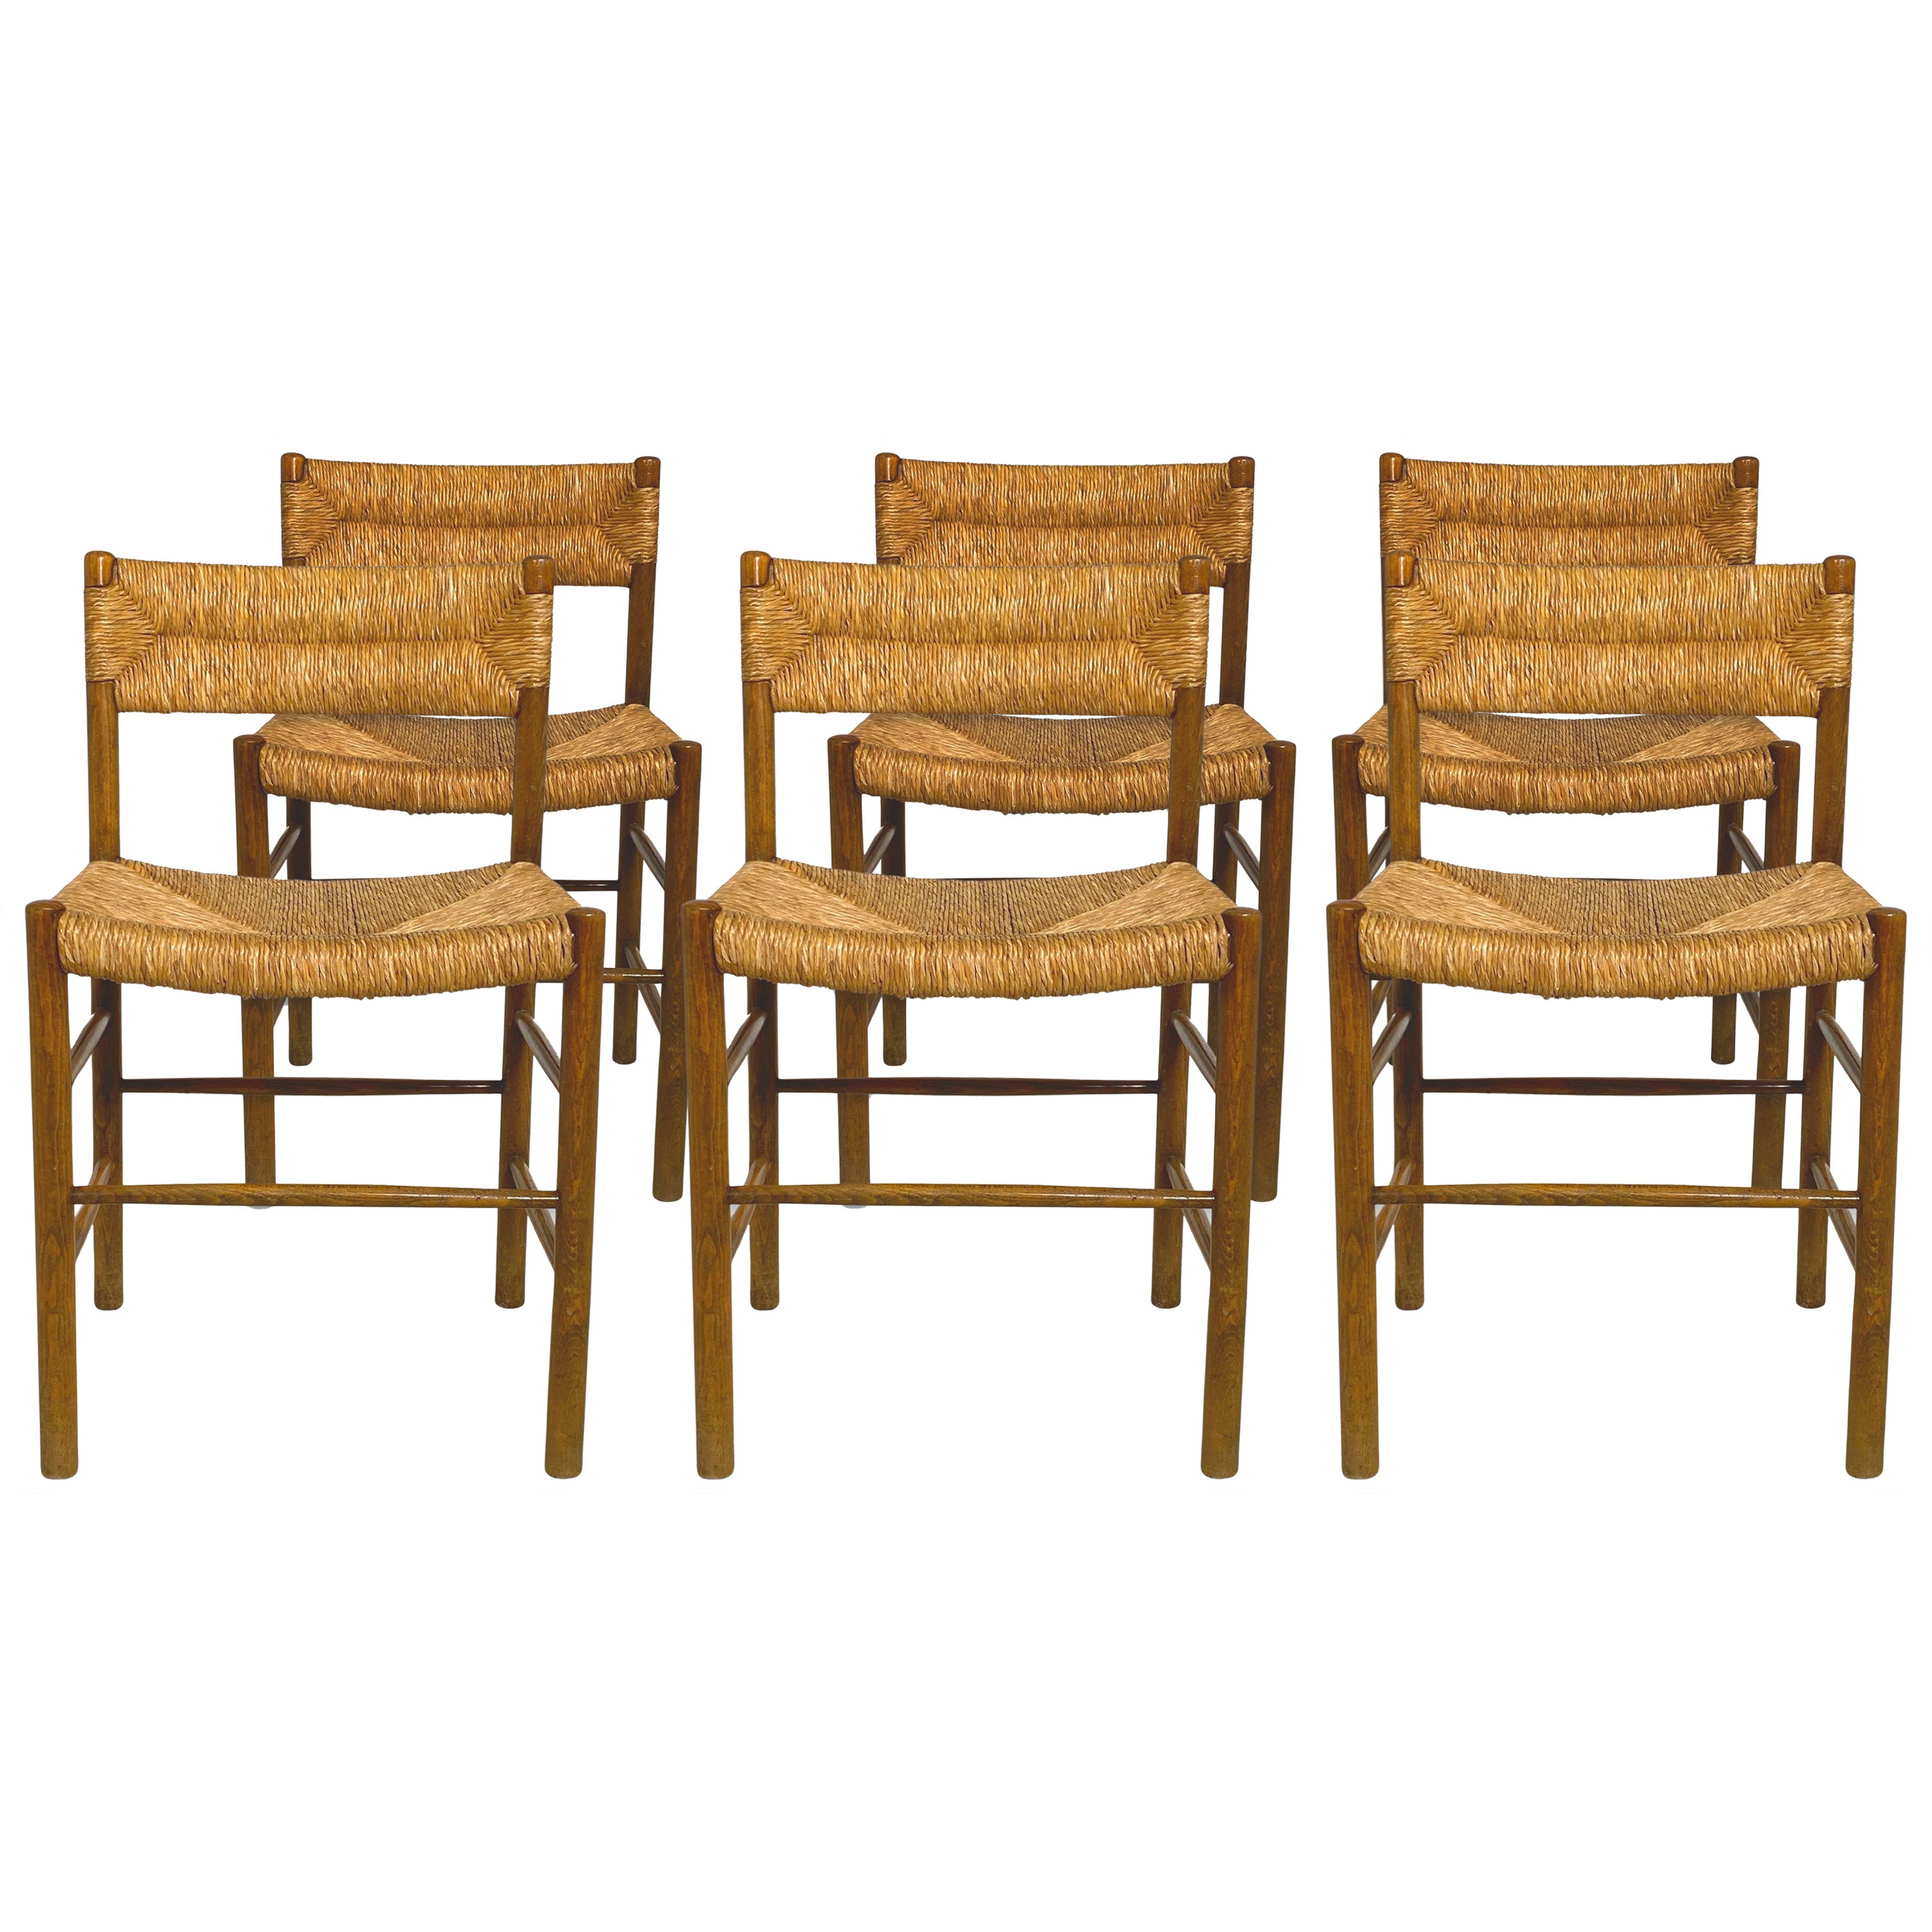 Chairs by Charlotte Perriand Dordogne Model Robert Santou France, Set of 6